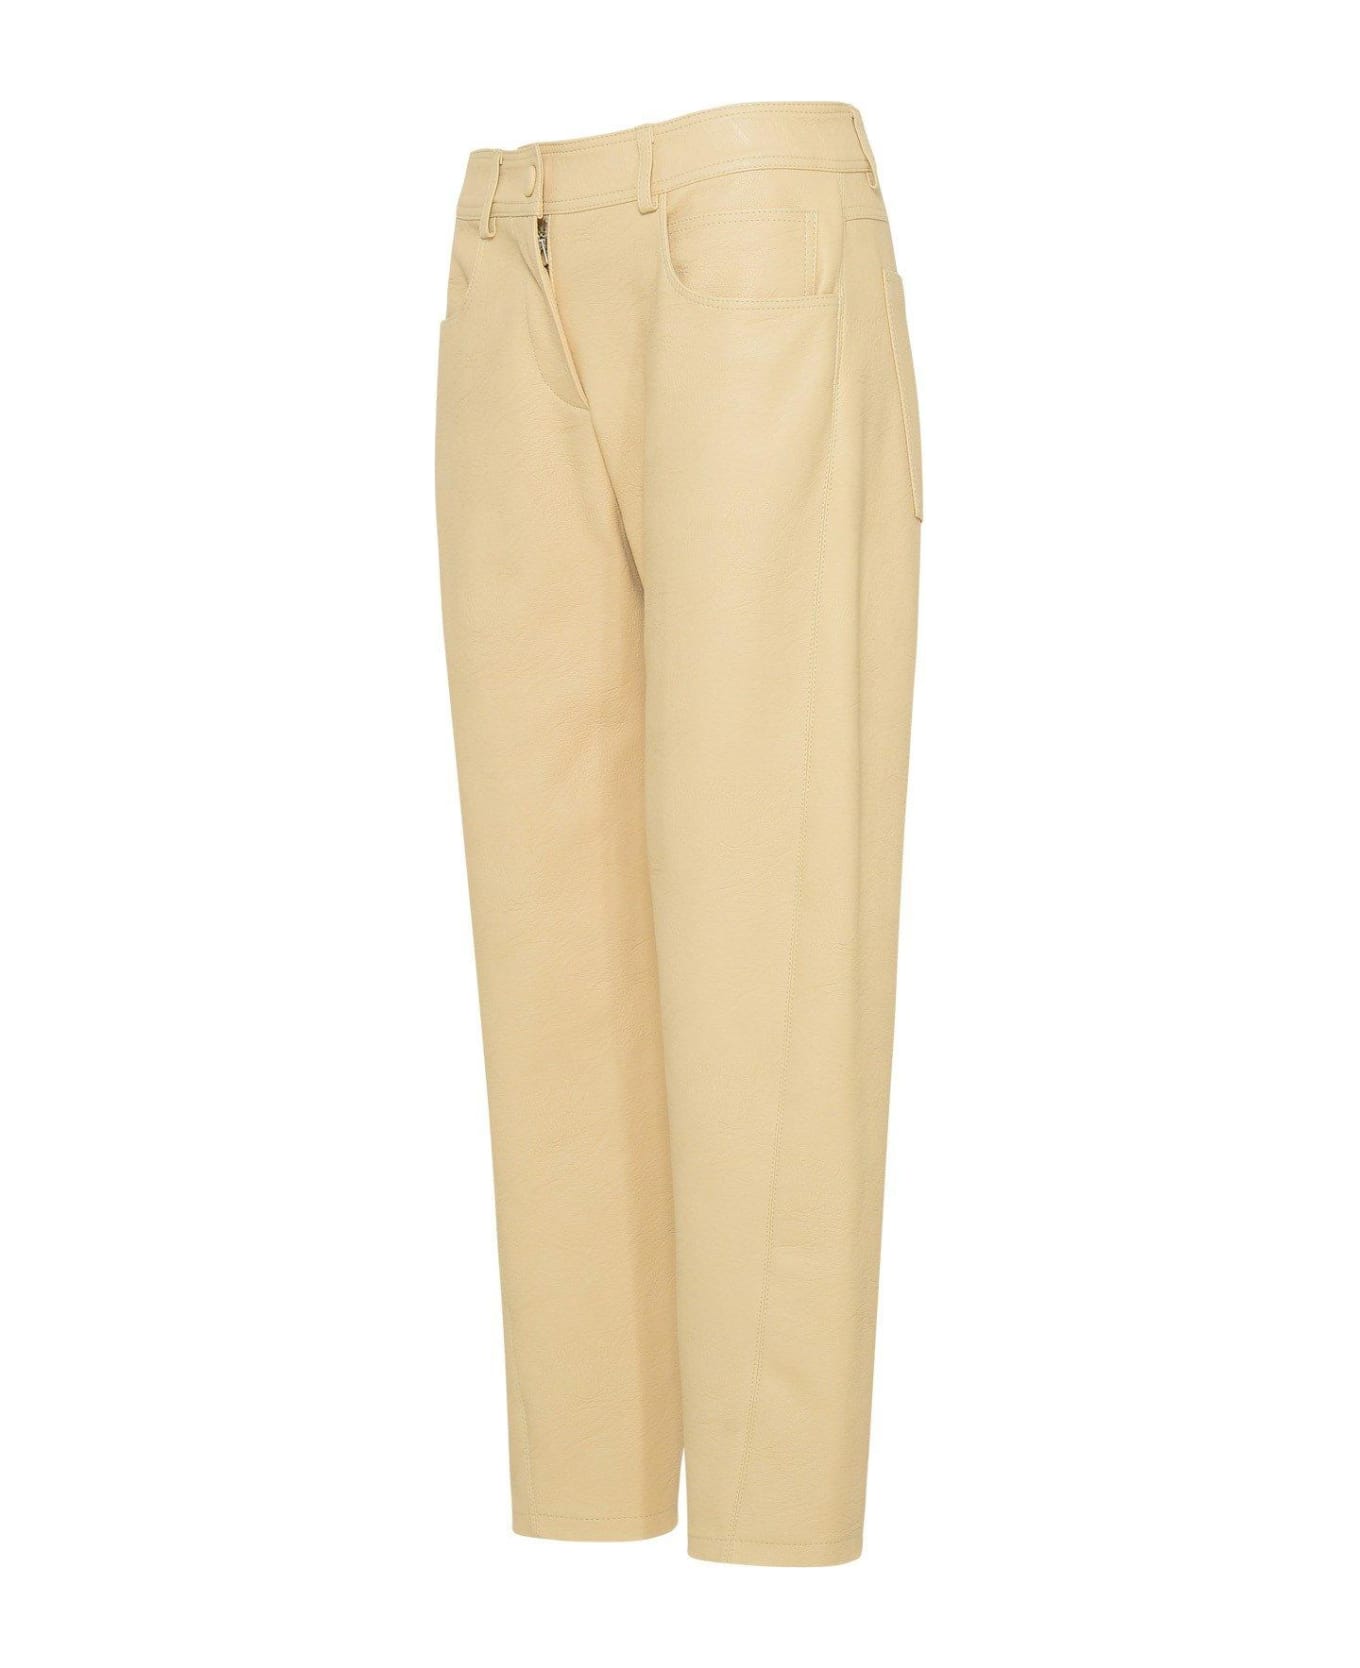 Stella McCartney Contrast Stitched Cropped Trousers - Beige ボトムス